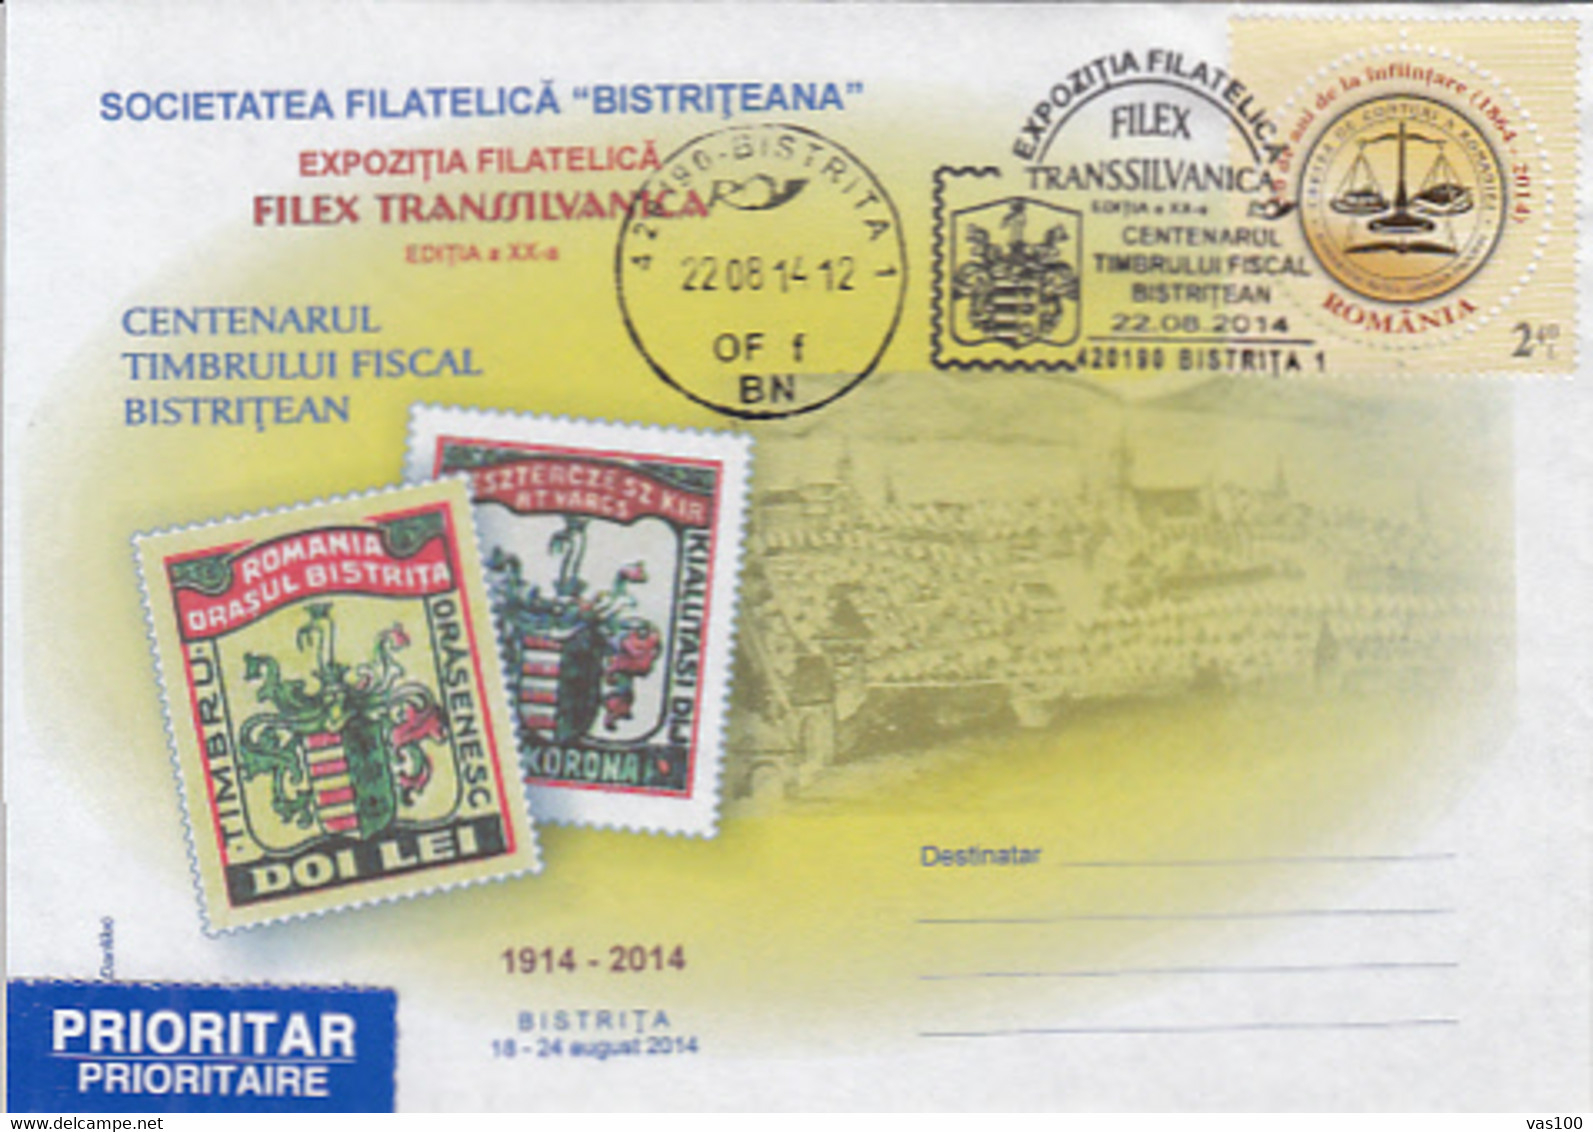 BISTRITA STAMP ISSUE ANNIVERSARY, SPECIAL COVER, 2014, ROMANIA - Covers & Documents